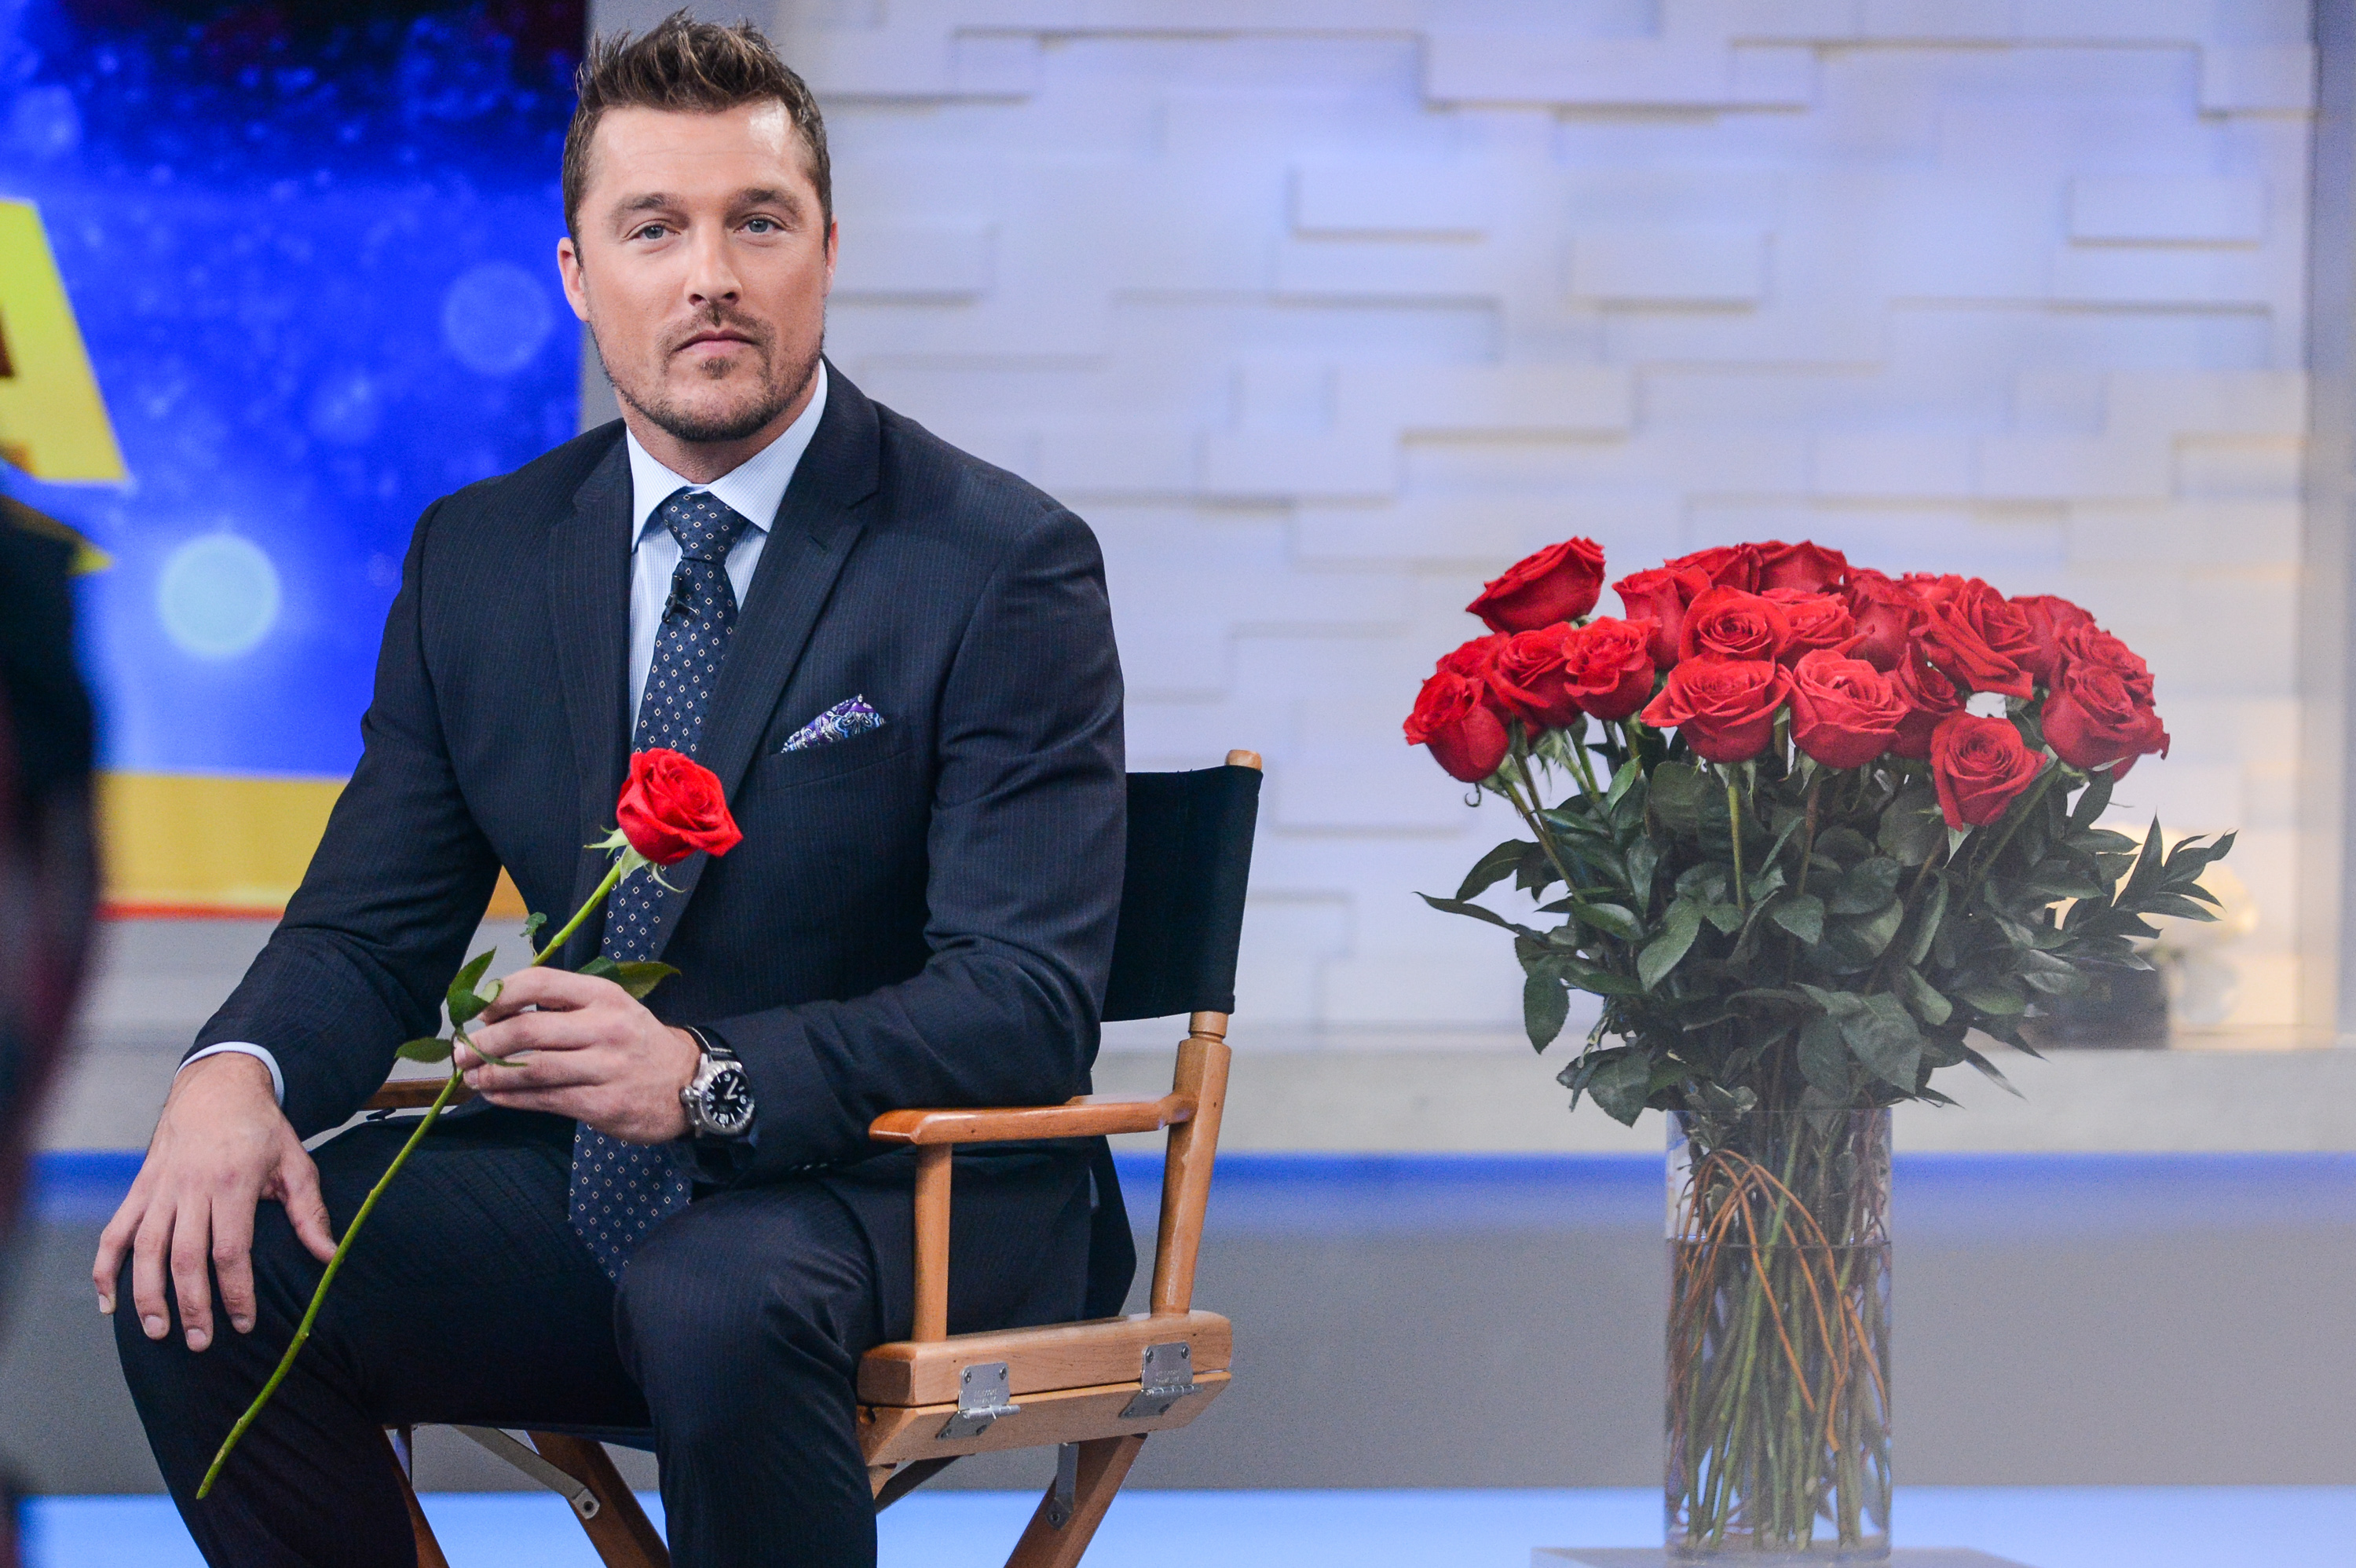 Television personality Chris Soules tapes an interview at <i>Good Morning America</i> at the ABC Times Square Studios in New York City on Jan. 5, 2015 (Ray Tamarra—GC Images)